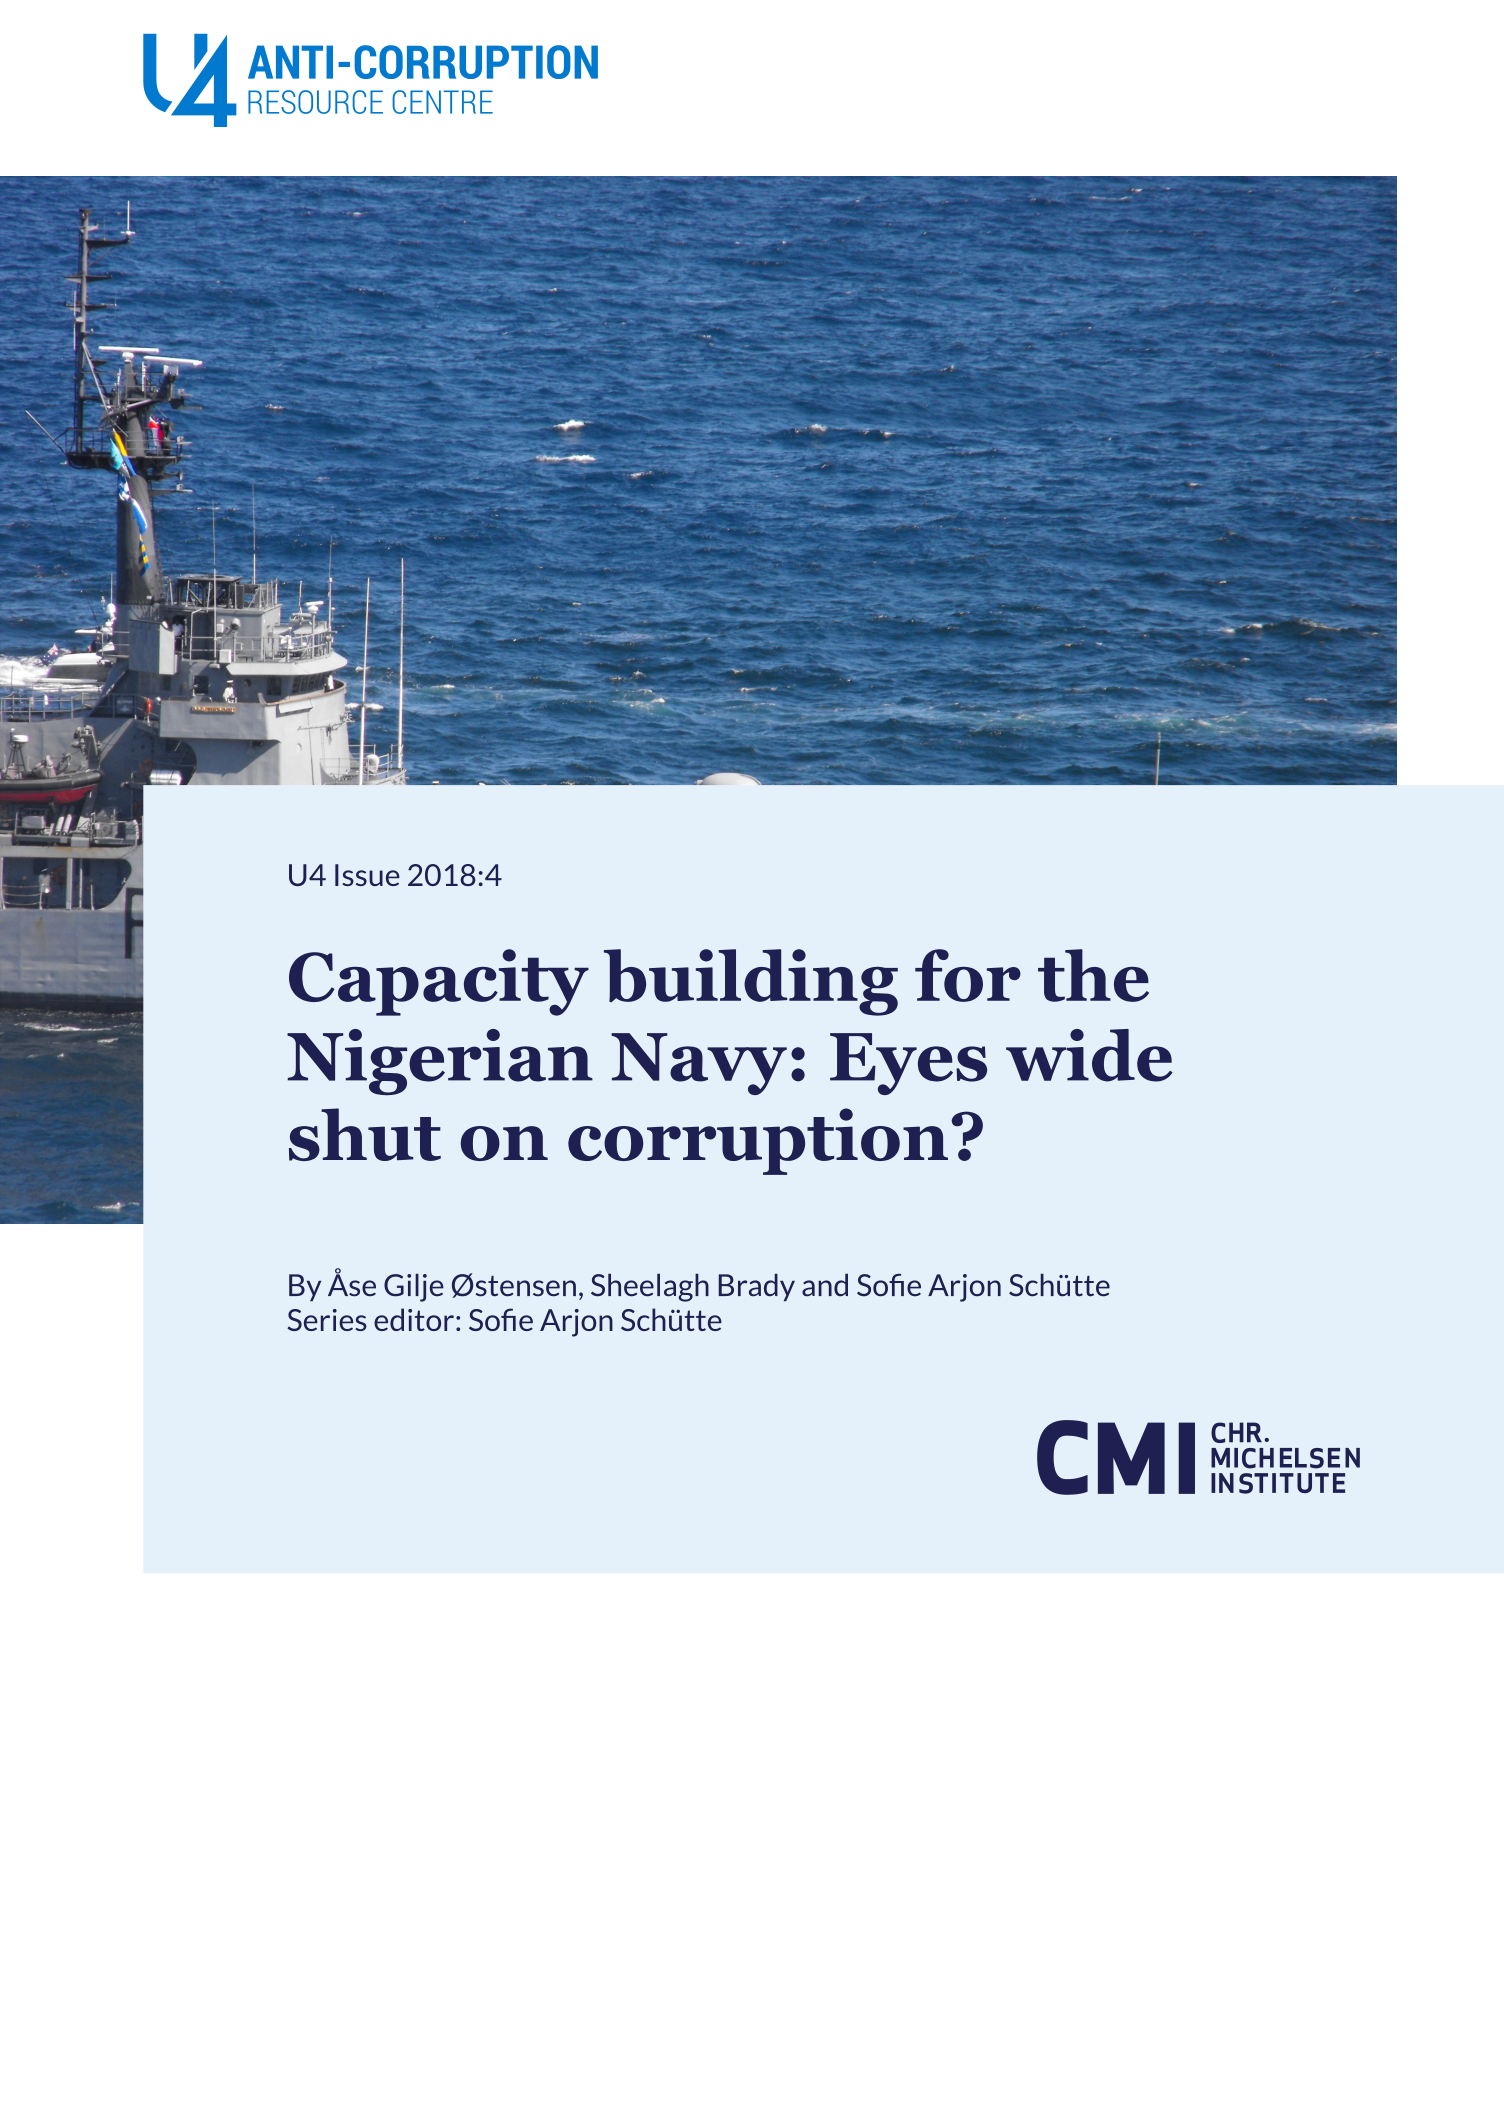 Capacity building for the Nigerian Navy: Eyes wide shut on corruption?